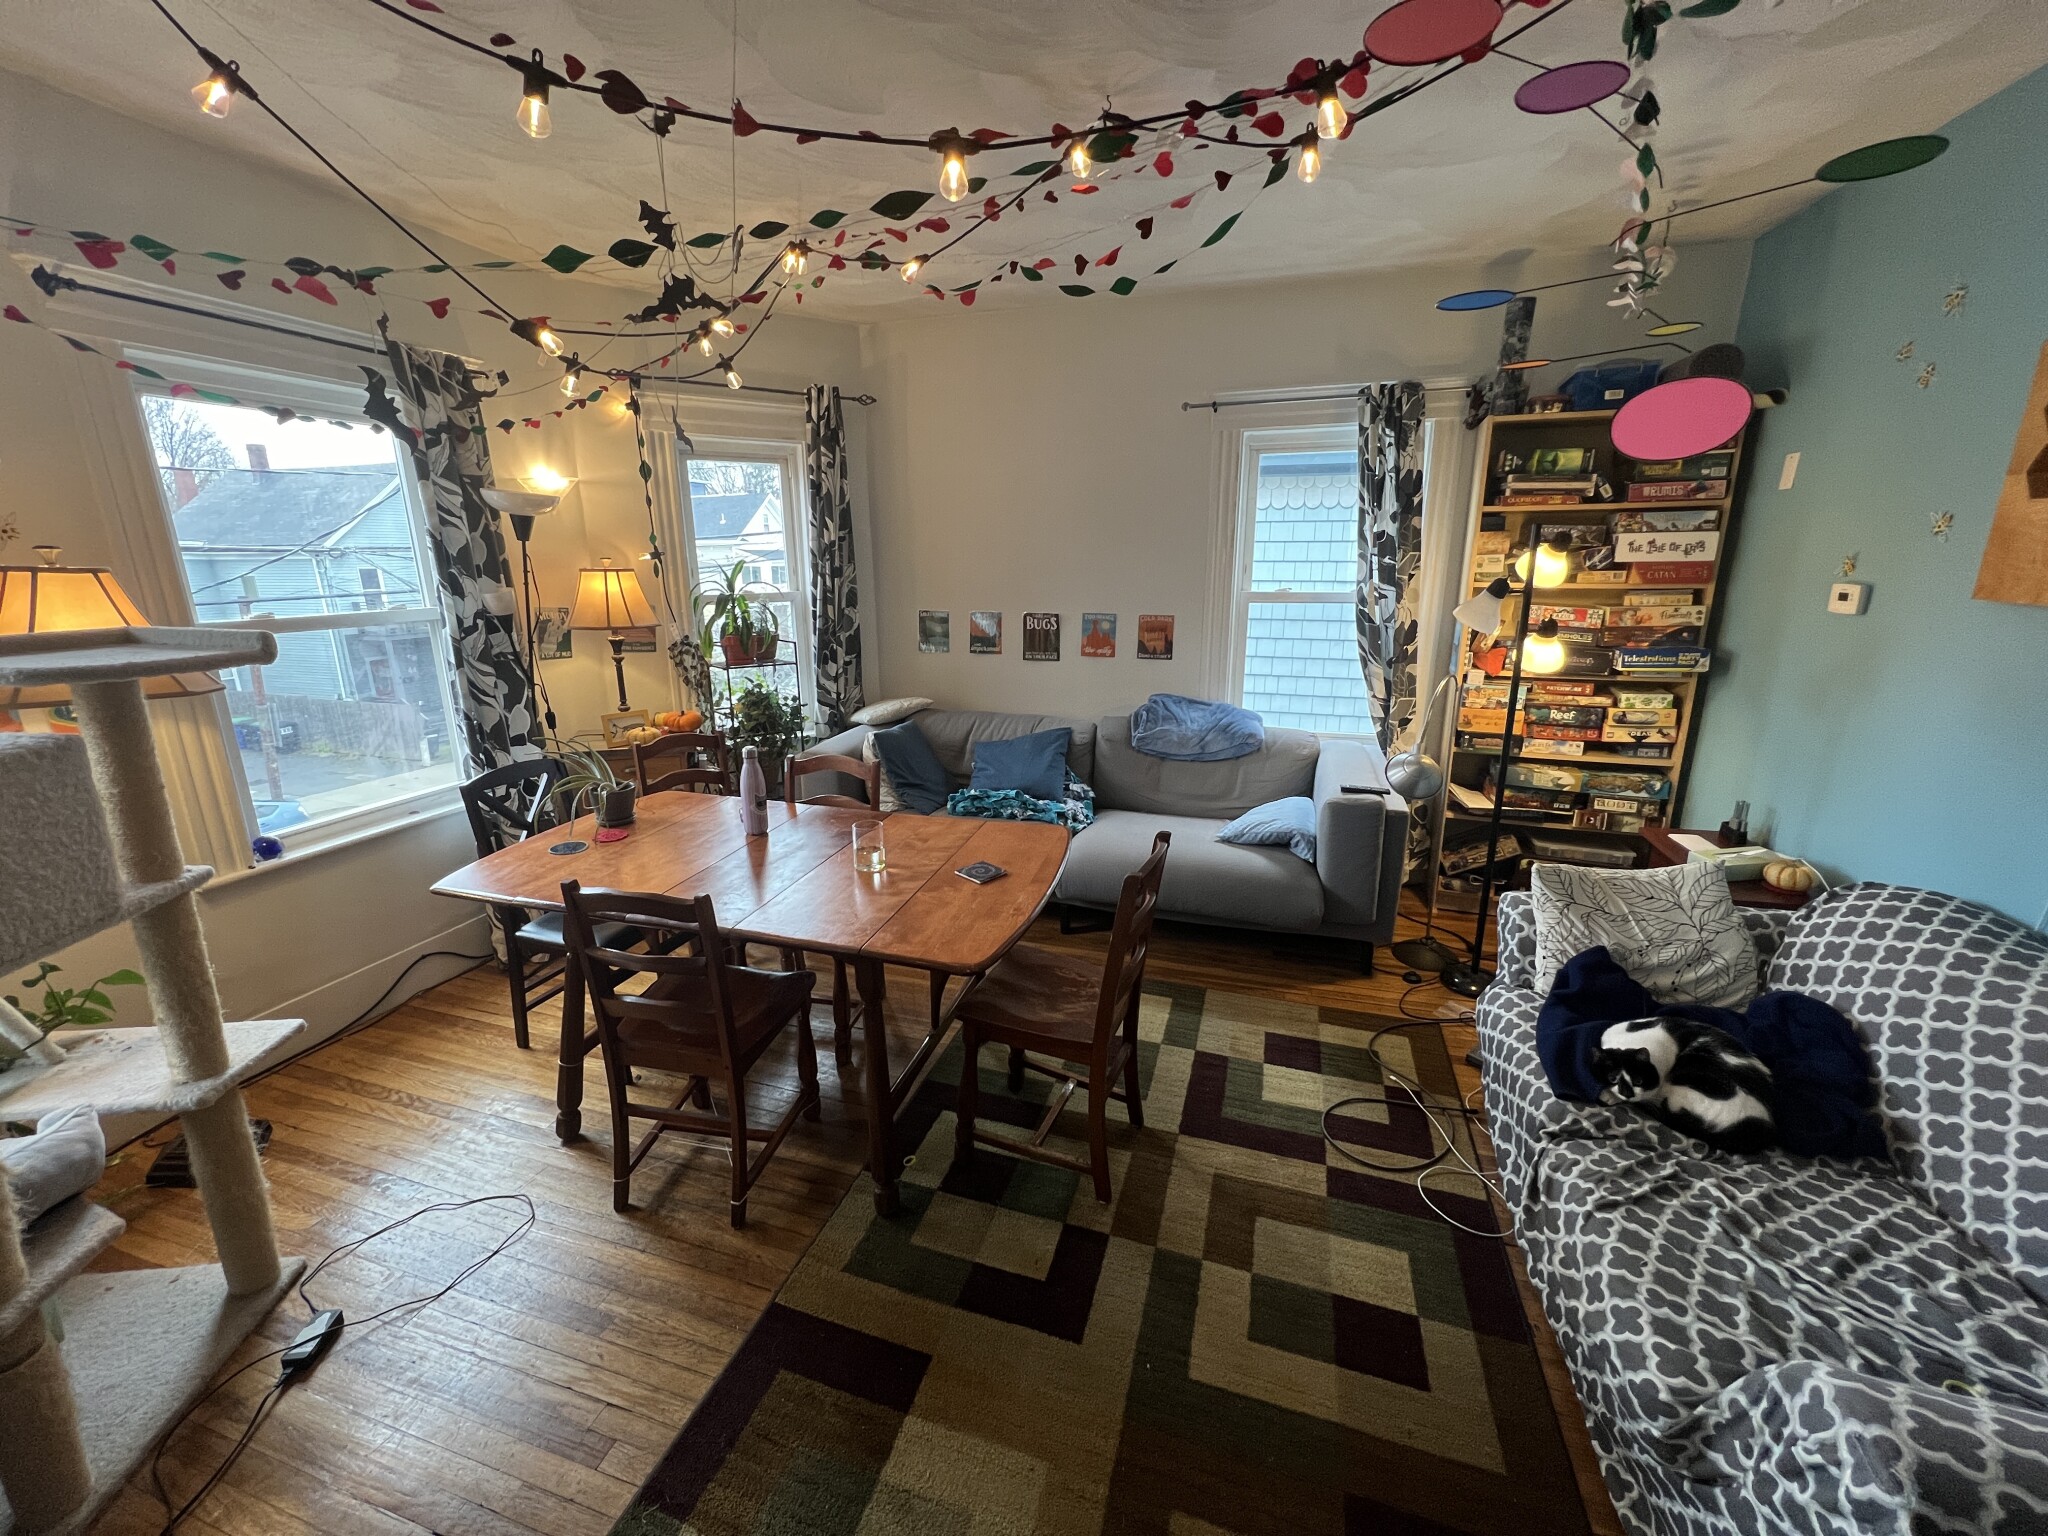 Photos of apartment on Bromfield Rd.,Somerville MA 02144